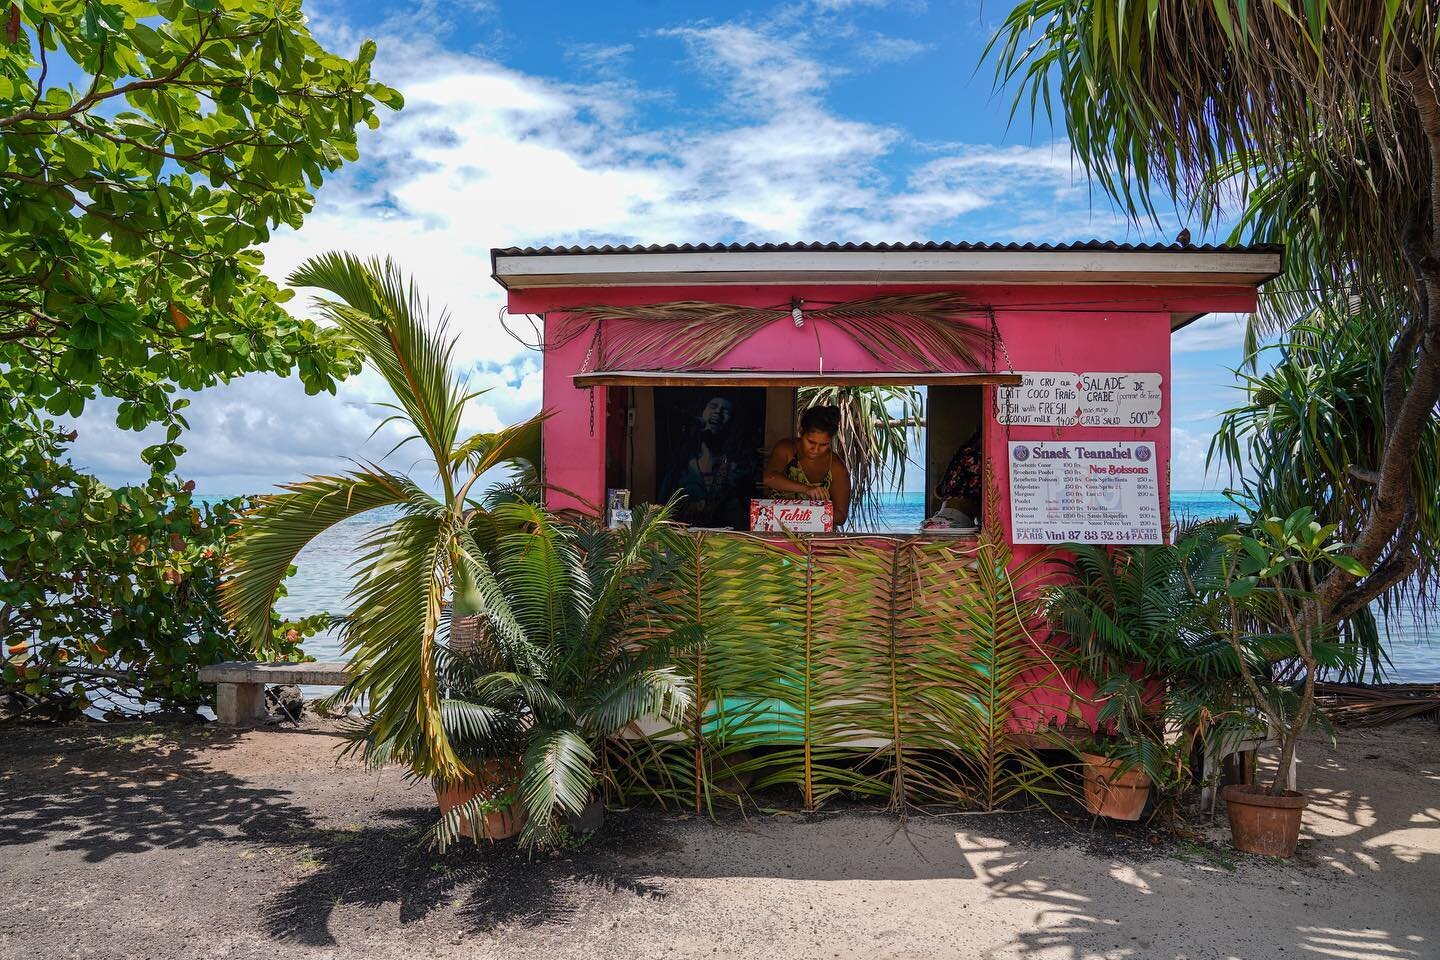 Seaside snack stop 🌴 I&rsquo;d eat at this little pink hut any day of the week. 
.
.
@tahitifoodtours 
.
.
.
.
#tahiti #lovetahiti #moorea #frenchpolynesia #tlpicks #foodandwine #lonelyplanet #culinary #foodporn #yourshotphotographer #sonyalpha #son